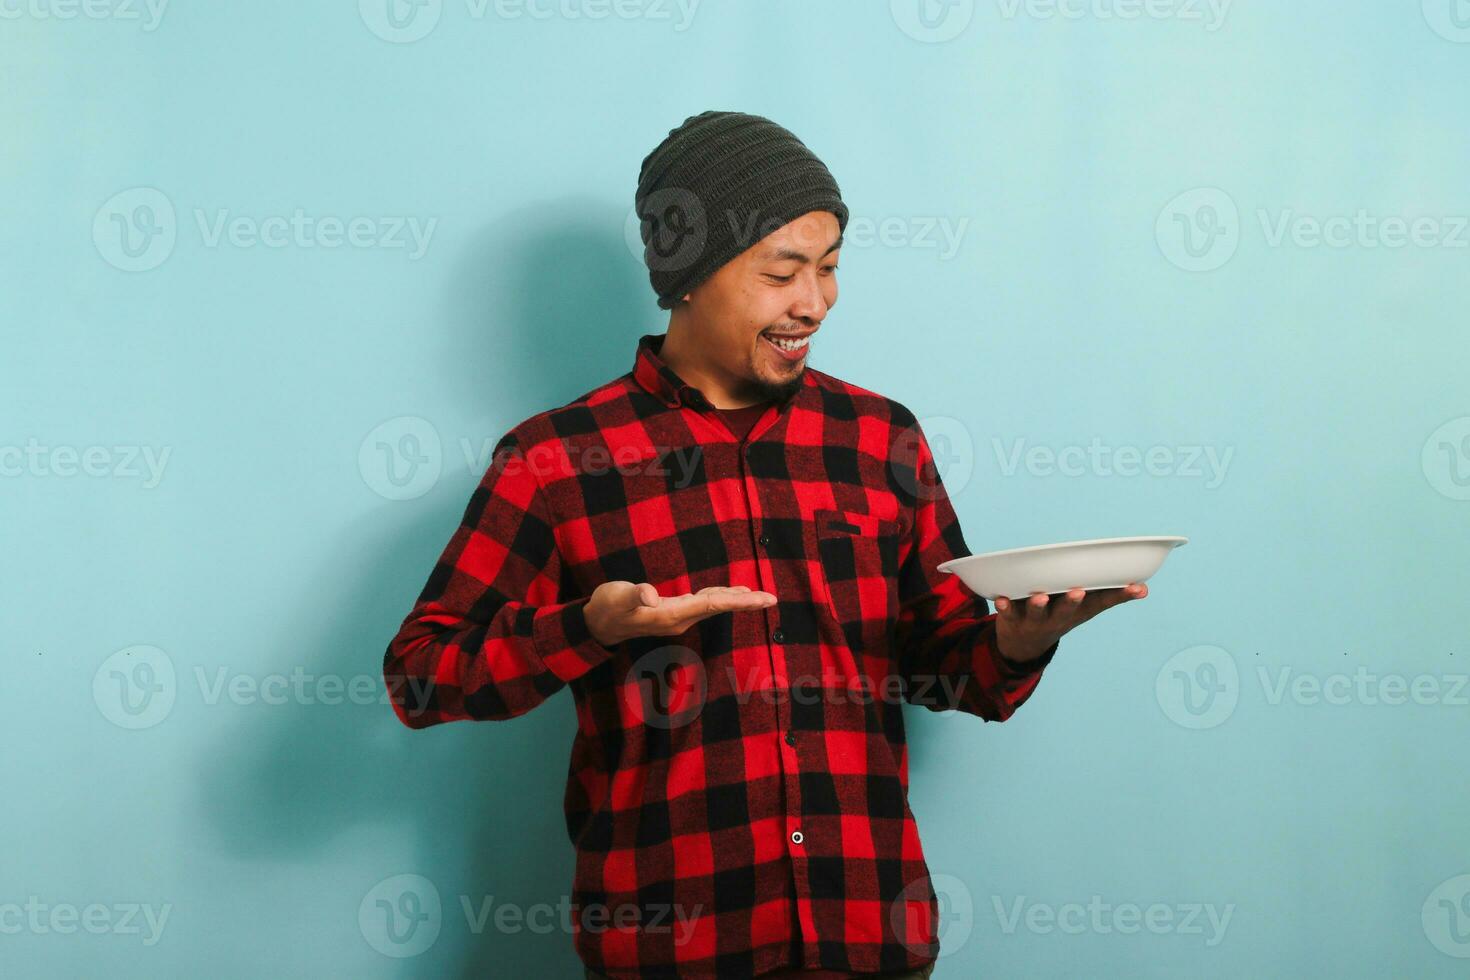 Excited Young Asian man with a beanie hat and a red plaid flannel shirt is showing an empty white plate in his hand, isolated on a blue background photo